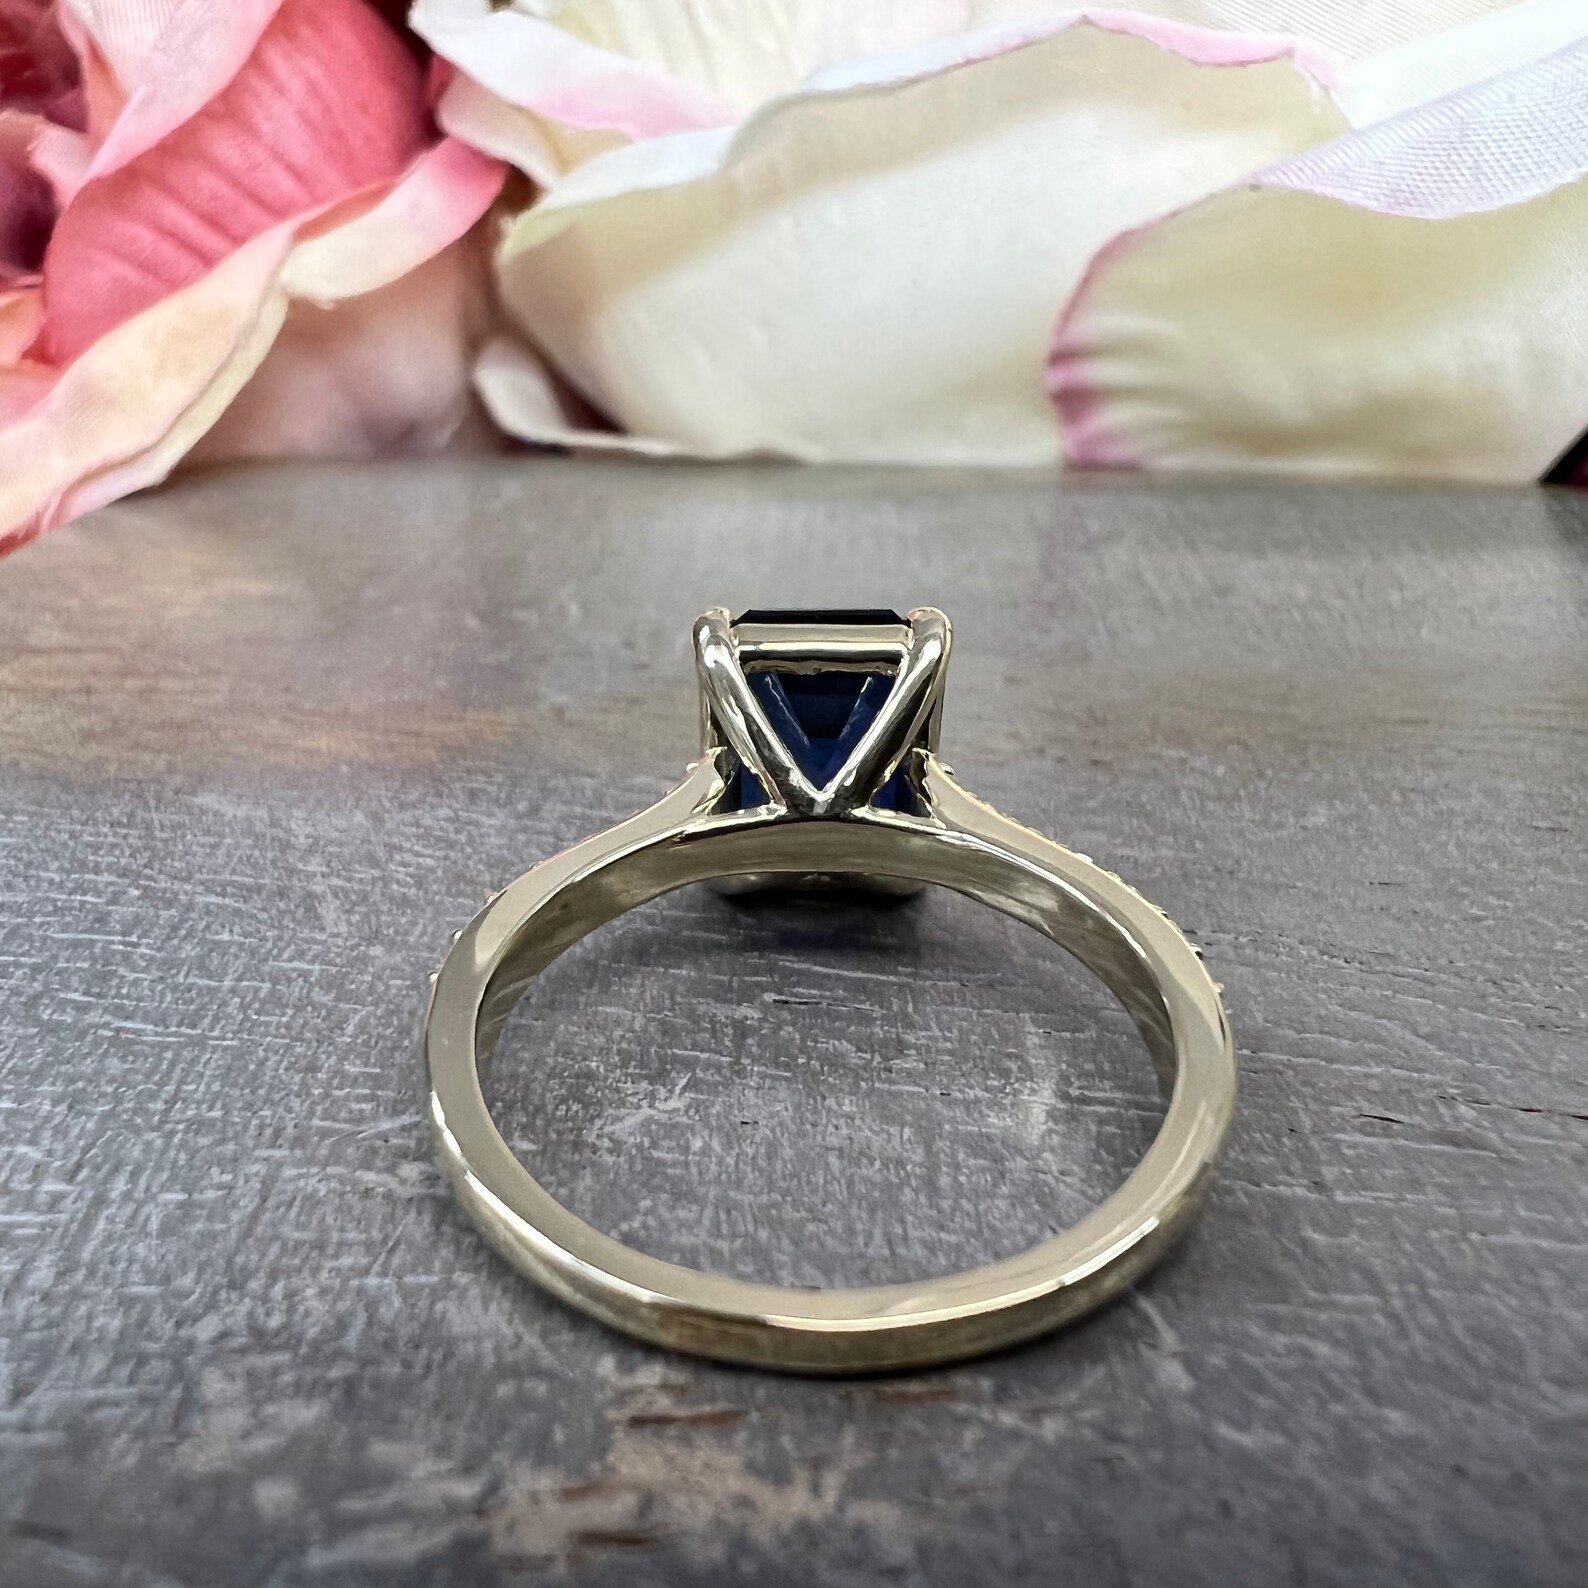 Emerald Cut Blue Sapphire Engagement Ring 14K White Gold - Etsy